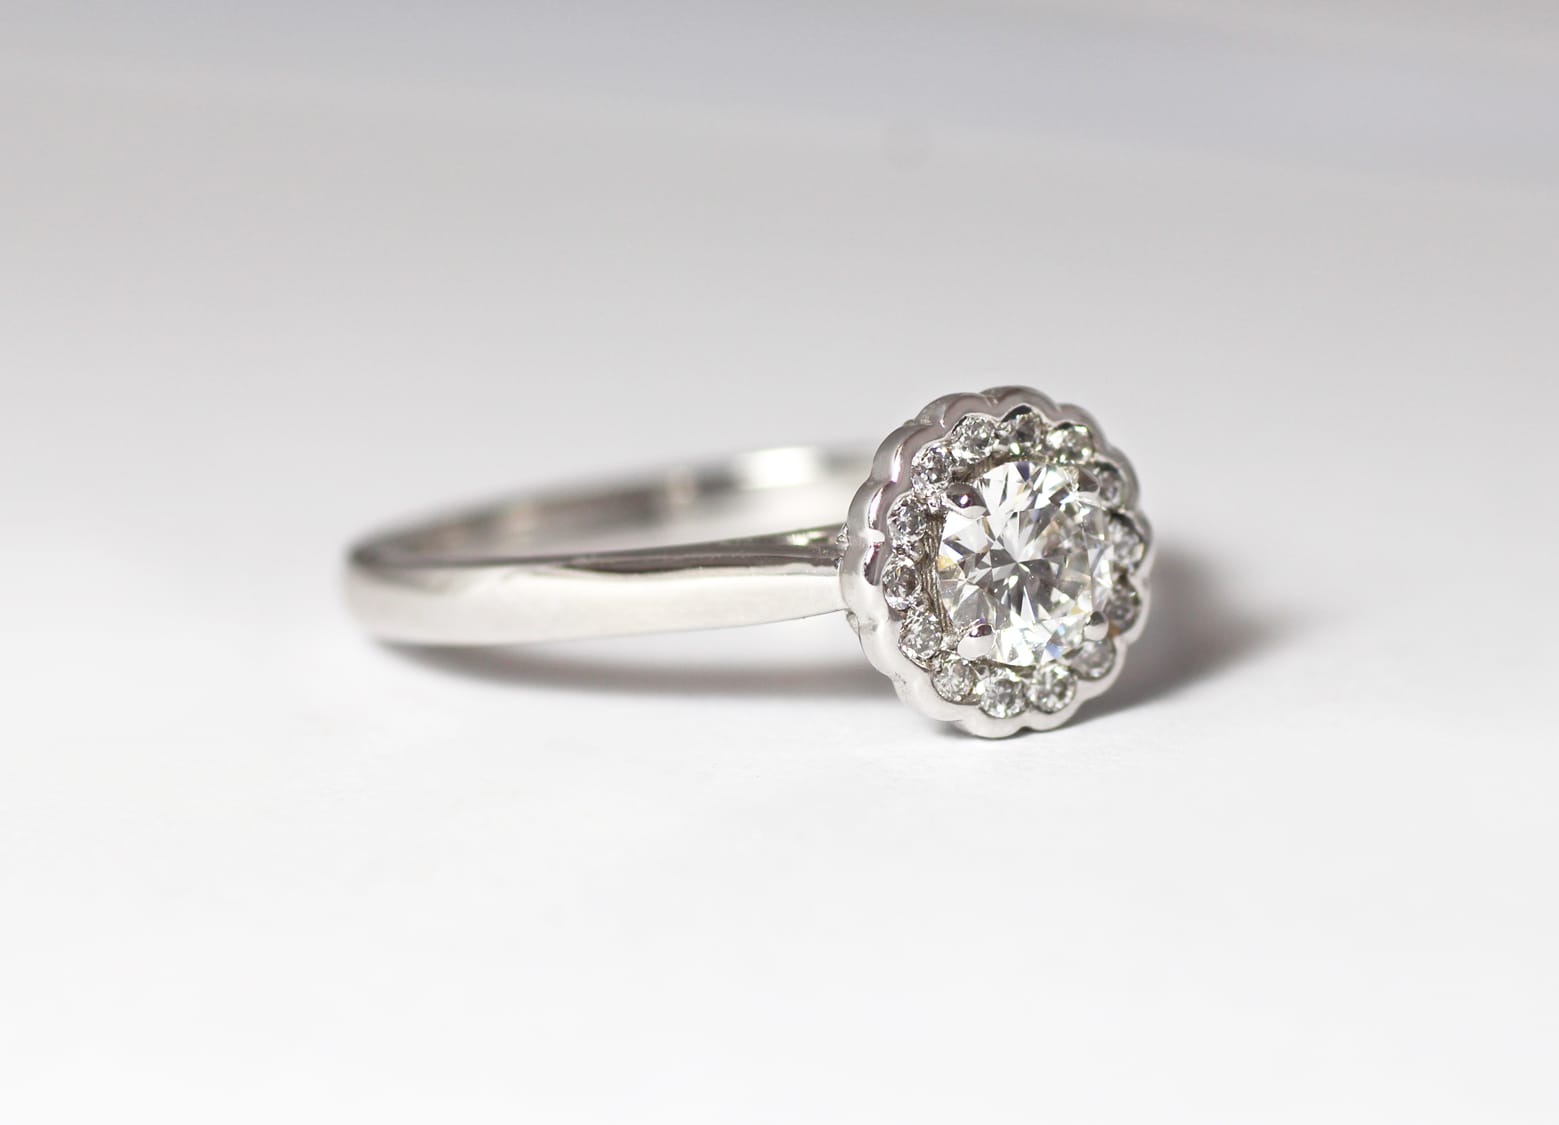 18ct Fairtrade white gold with diamonds and bespoke setting by Zoe Pook Jewellery